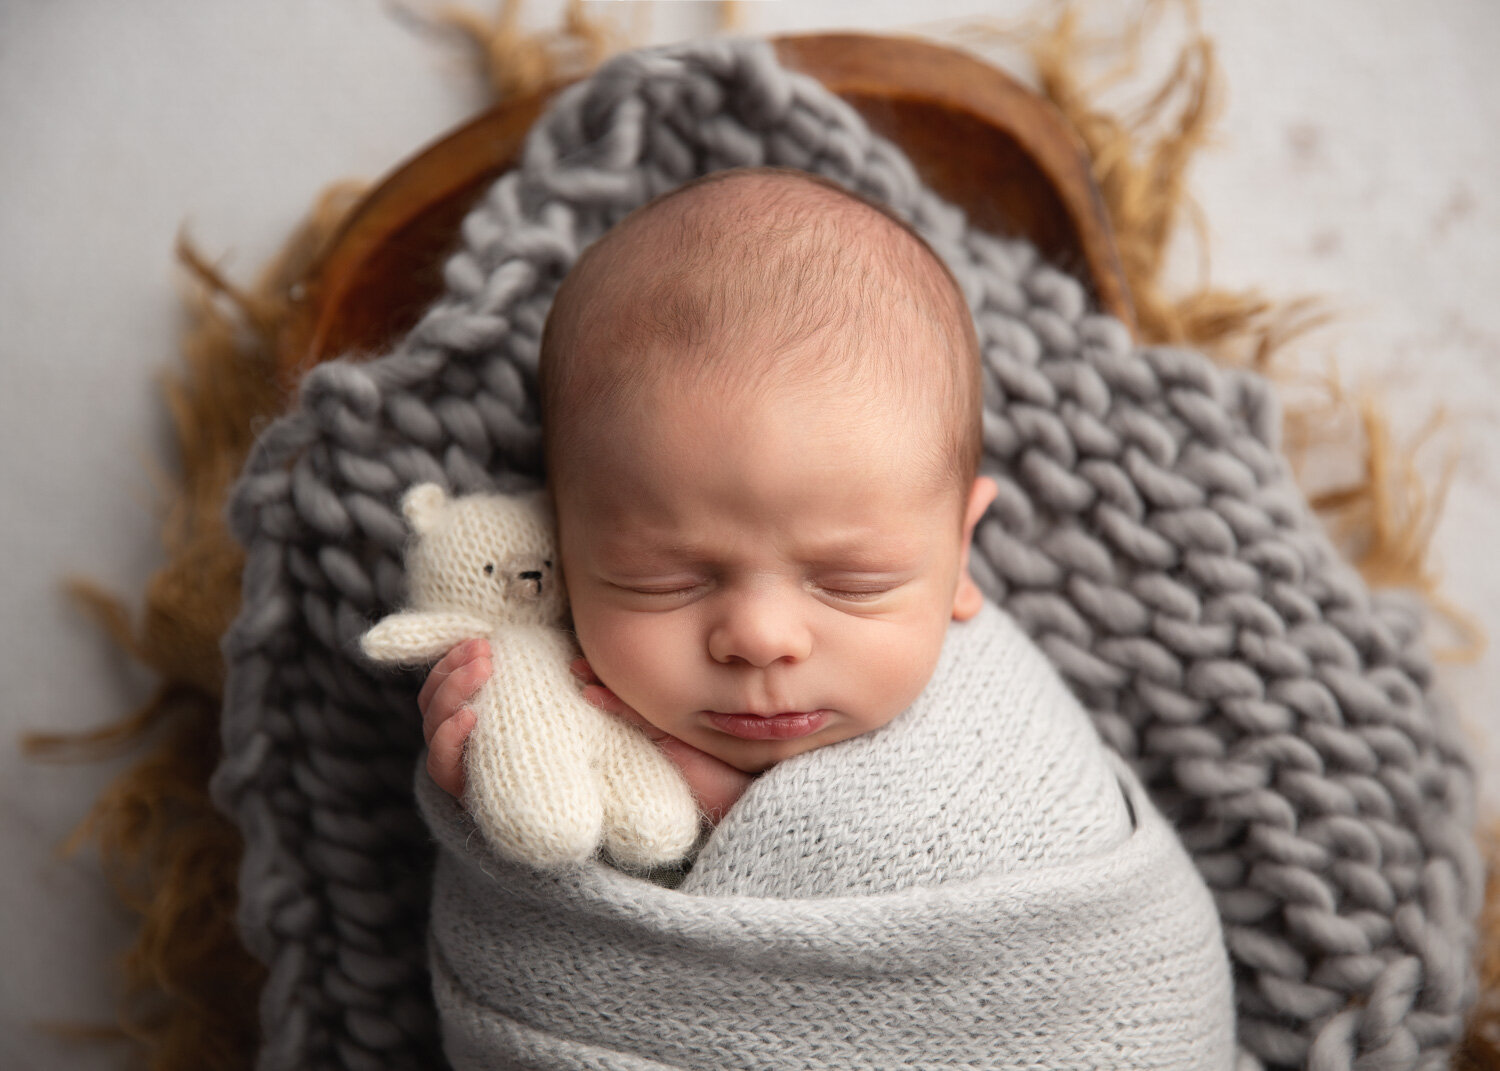  Adorable newborn baby boy holding teddy while wrapped up in crate for Newborn photography session in Winnipeg 